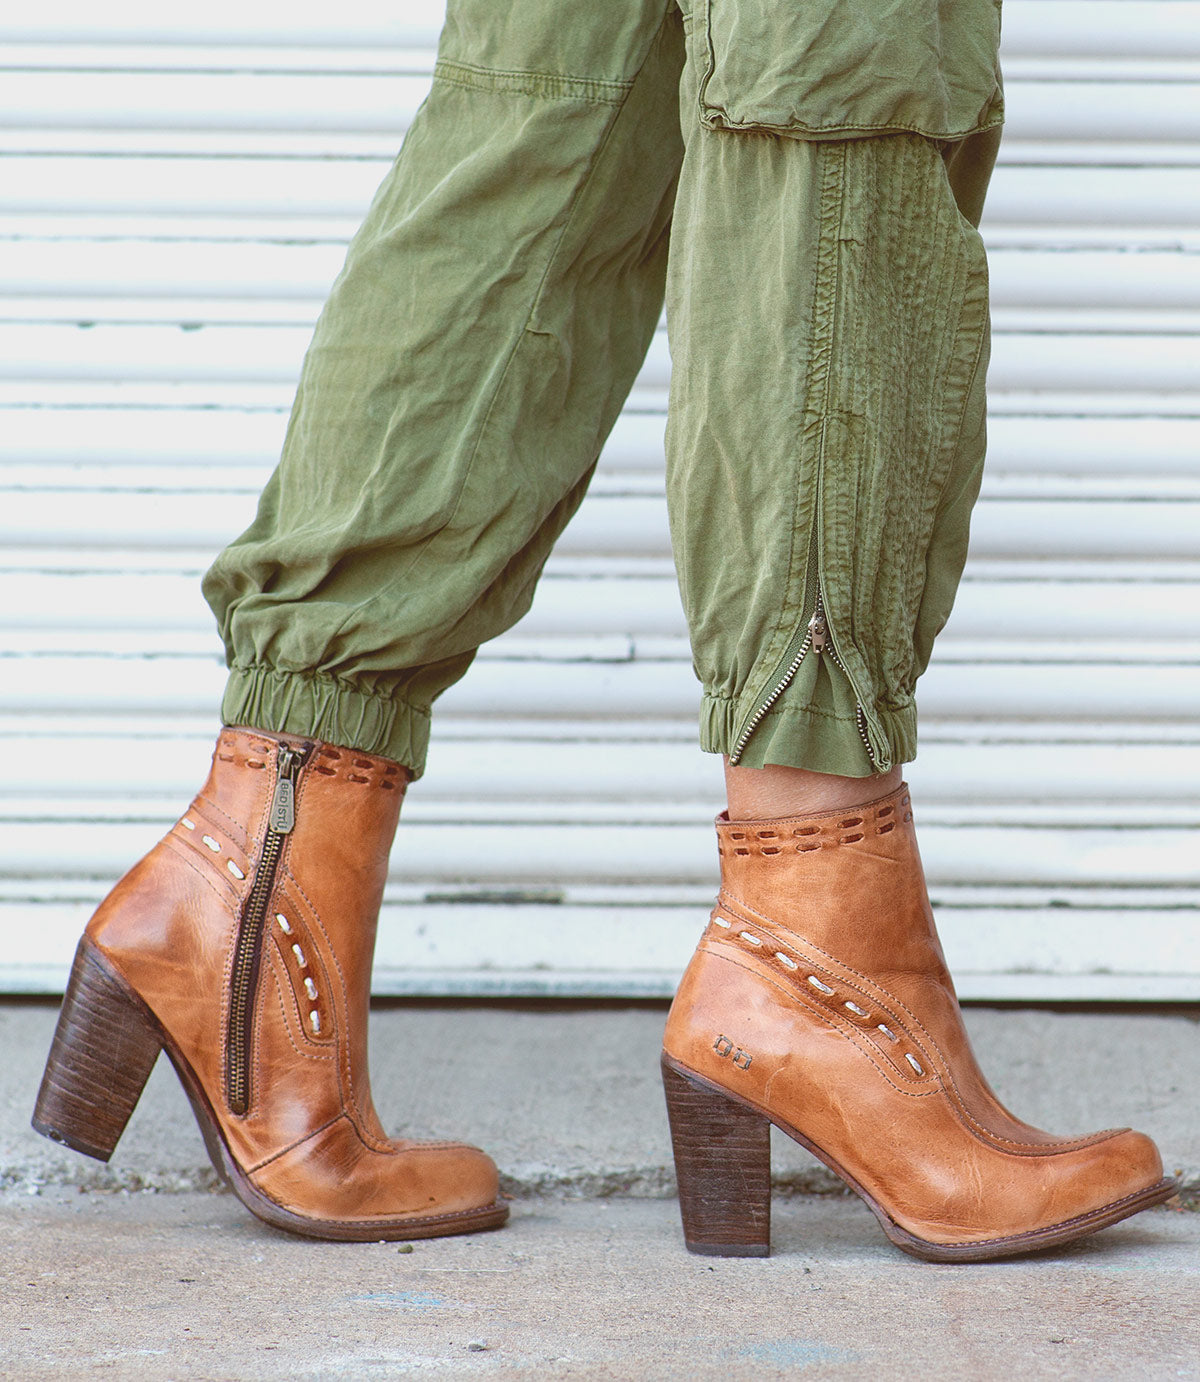 A woman wearing green Yuno pants and Bed Stu ankle boots made of leather.